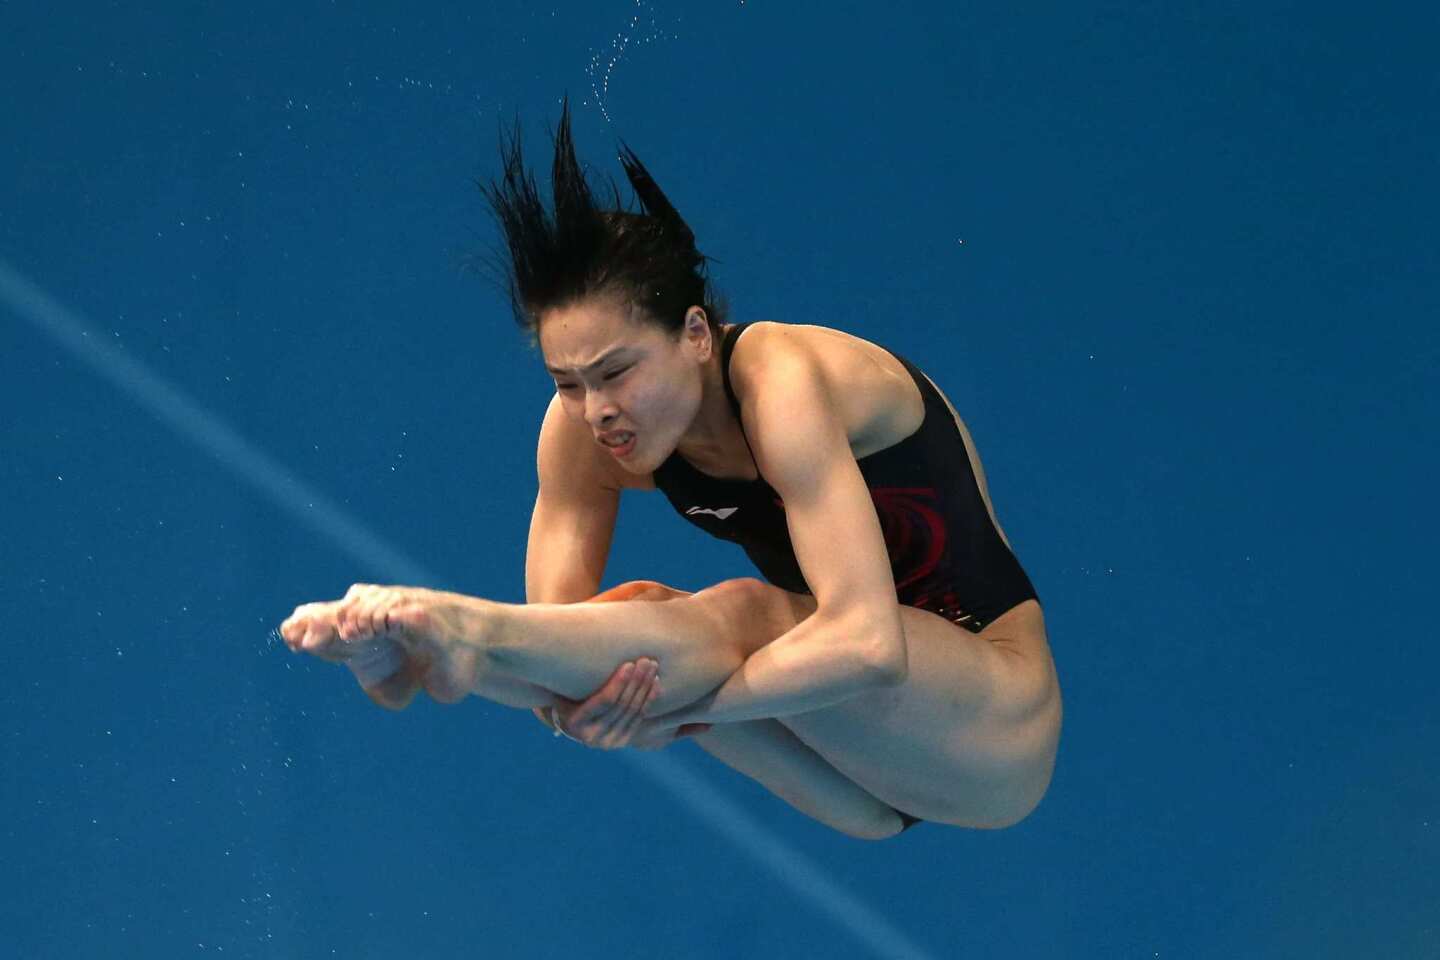 Wu Minxia of China competes in the women's 3-meter springboard diving final at the Aquatics Center. She earned the gold medal.